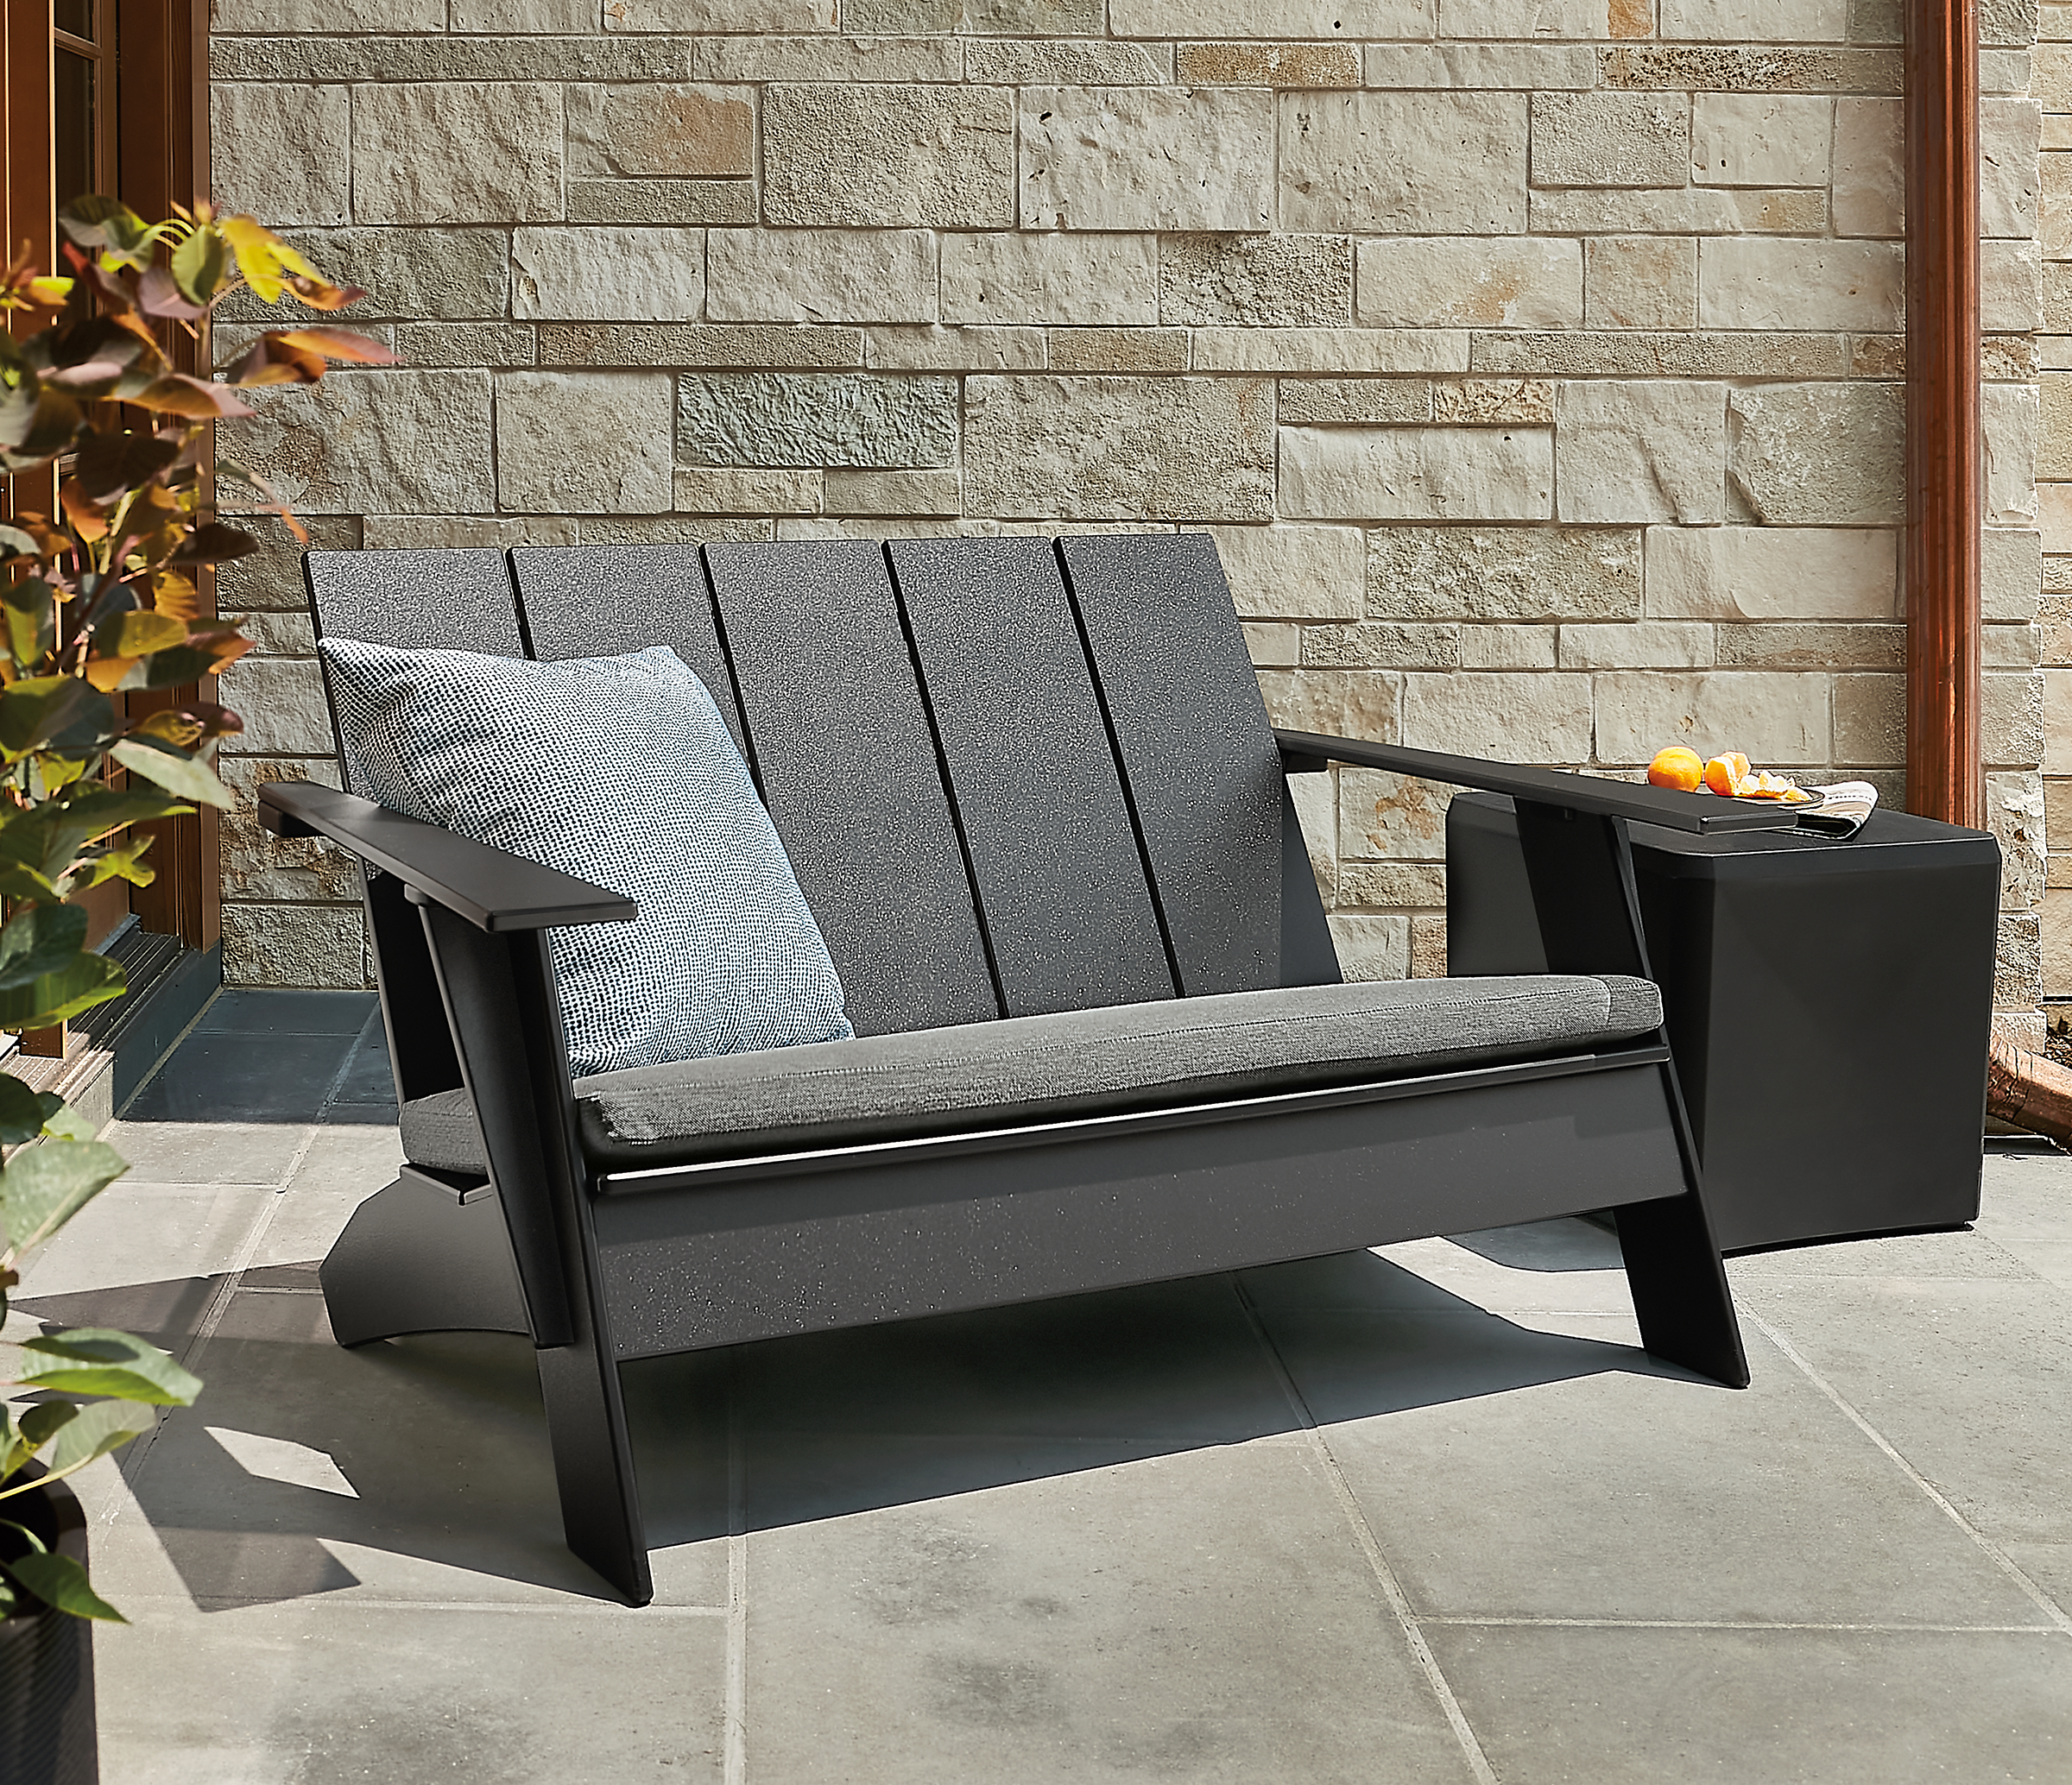 Outdoor space with emmet sofa with cushion, large bronson pillow, cusp square stool.